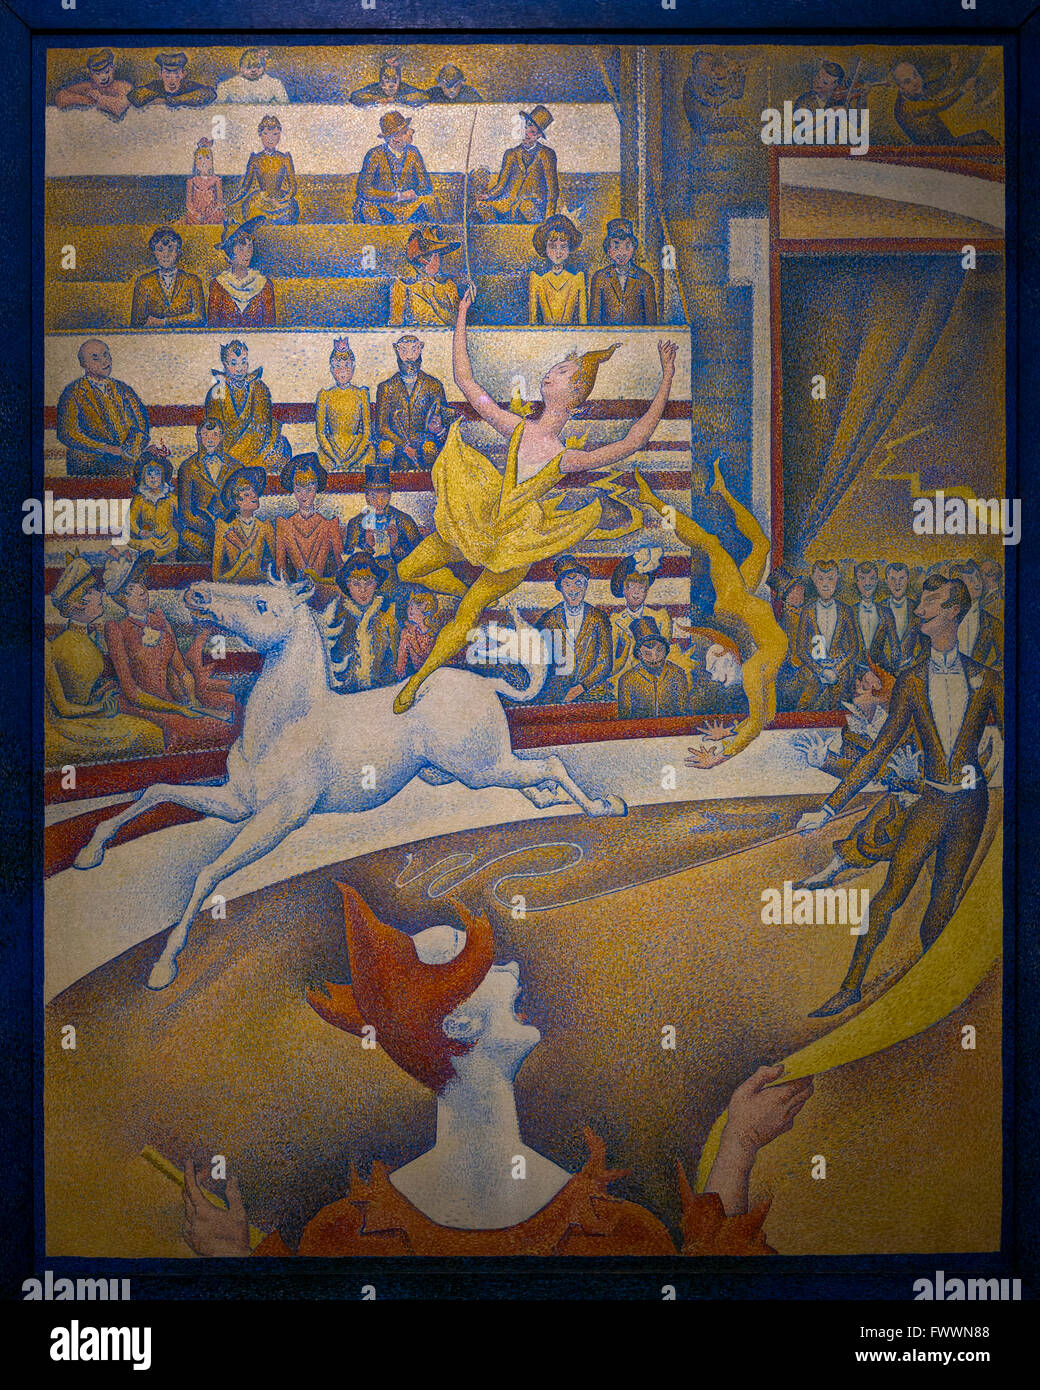 The Circus, Cirque, by Georges Seurat, 1891, Musee D'Orsay, Paris, France, Europe Stock Photo